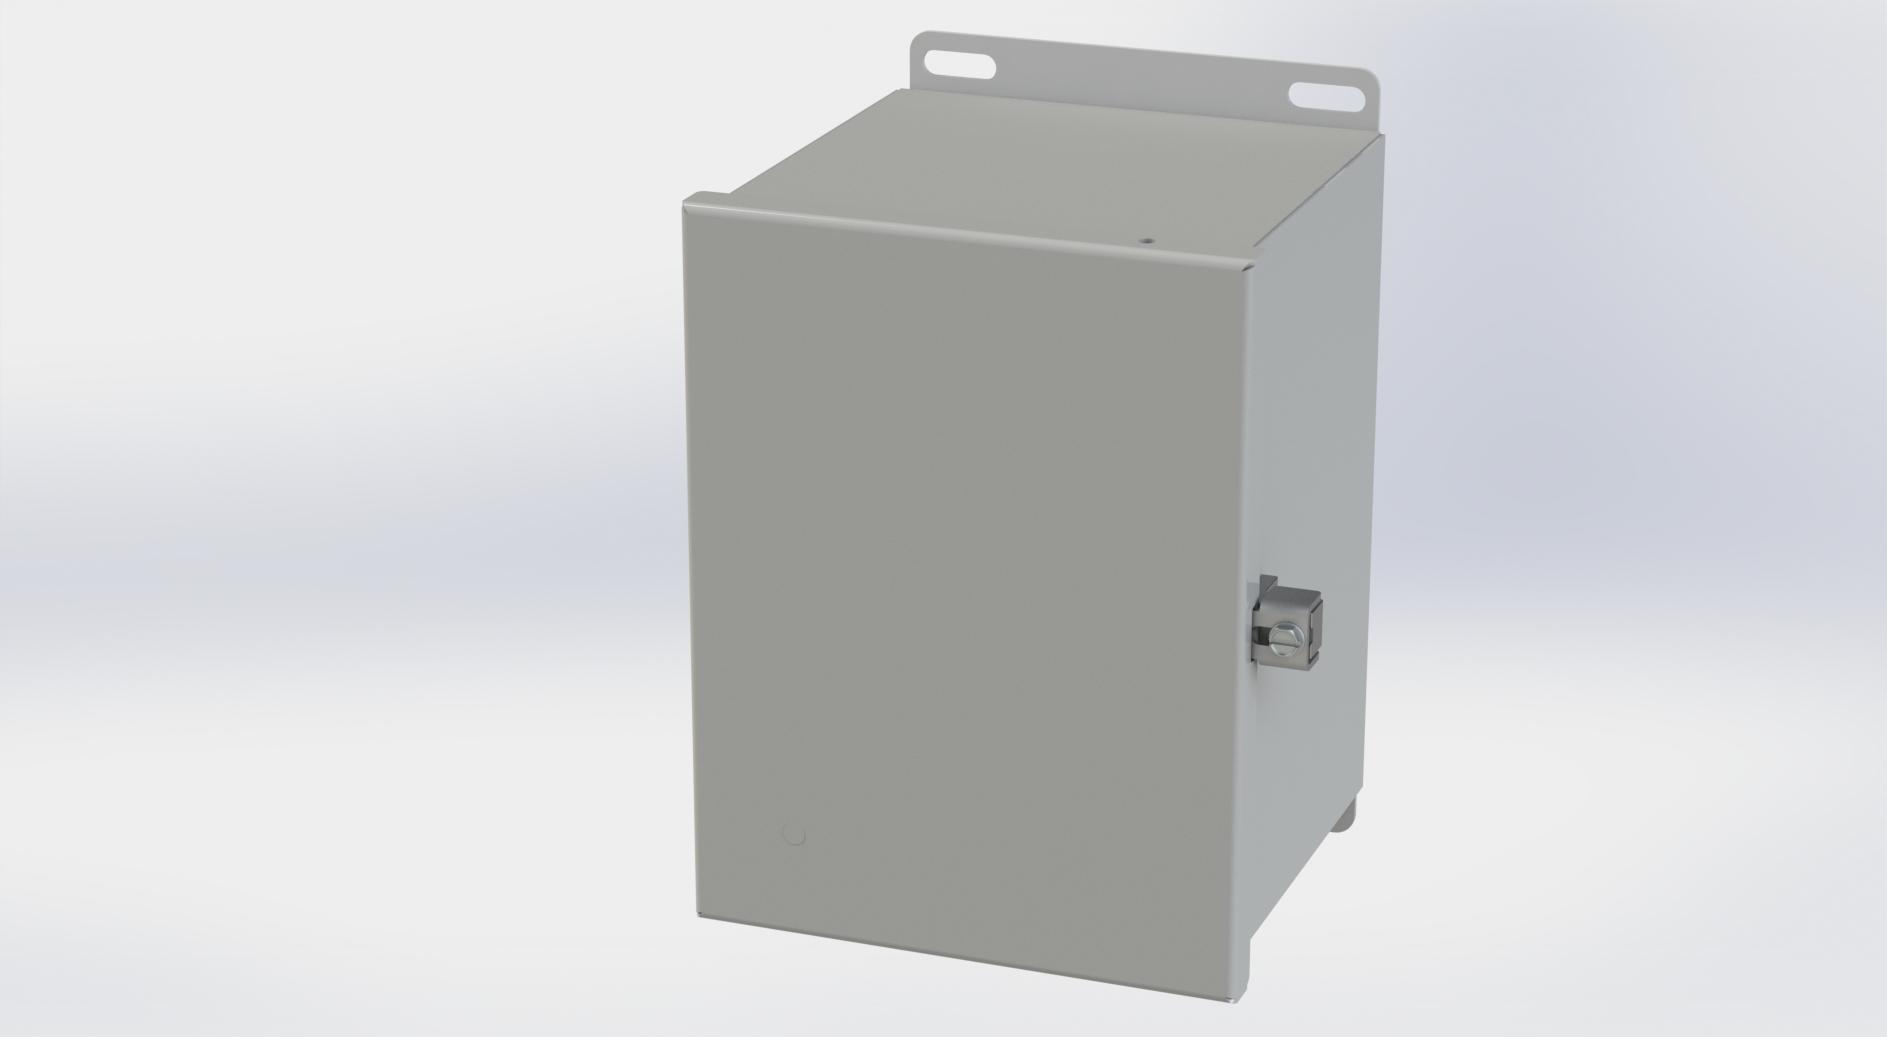 Saginaw Control SCE-8066CHNF CHNF Enclosure, Height:8.13", Width:6.00", Depth:6.00", ANSI-61 gray powder coating inside and out. Optional sub-panels are powder coated white.